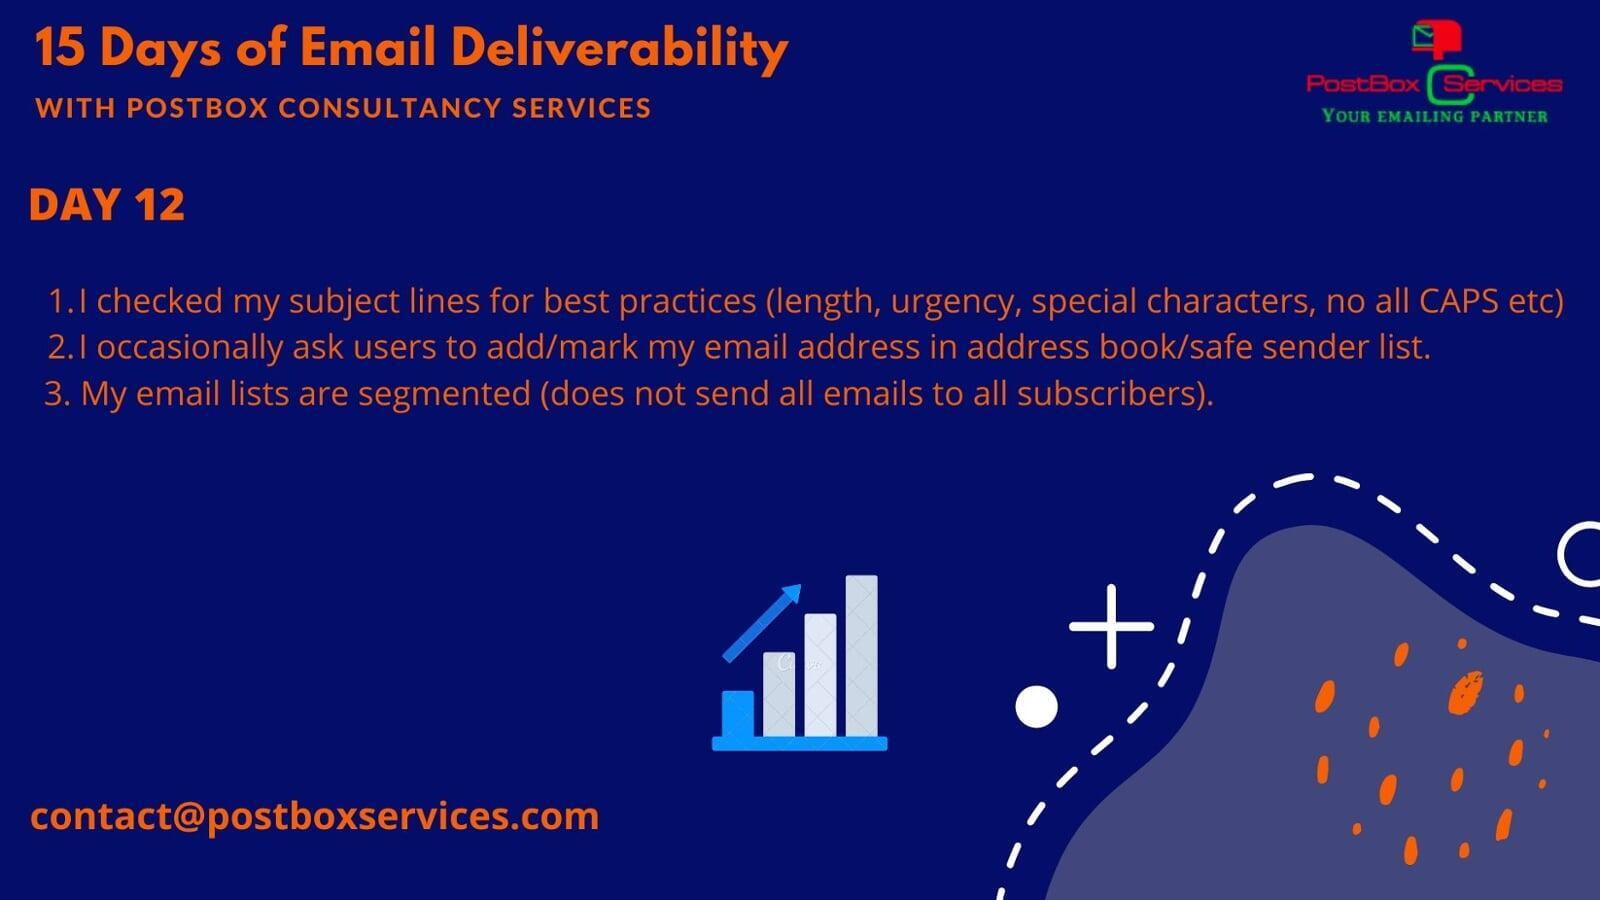 Day 12 Email Deliverability